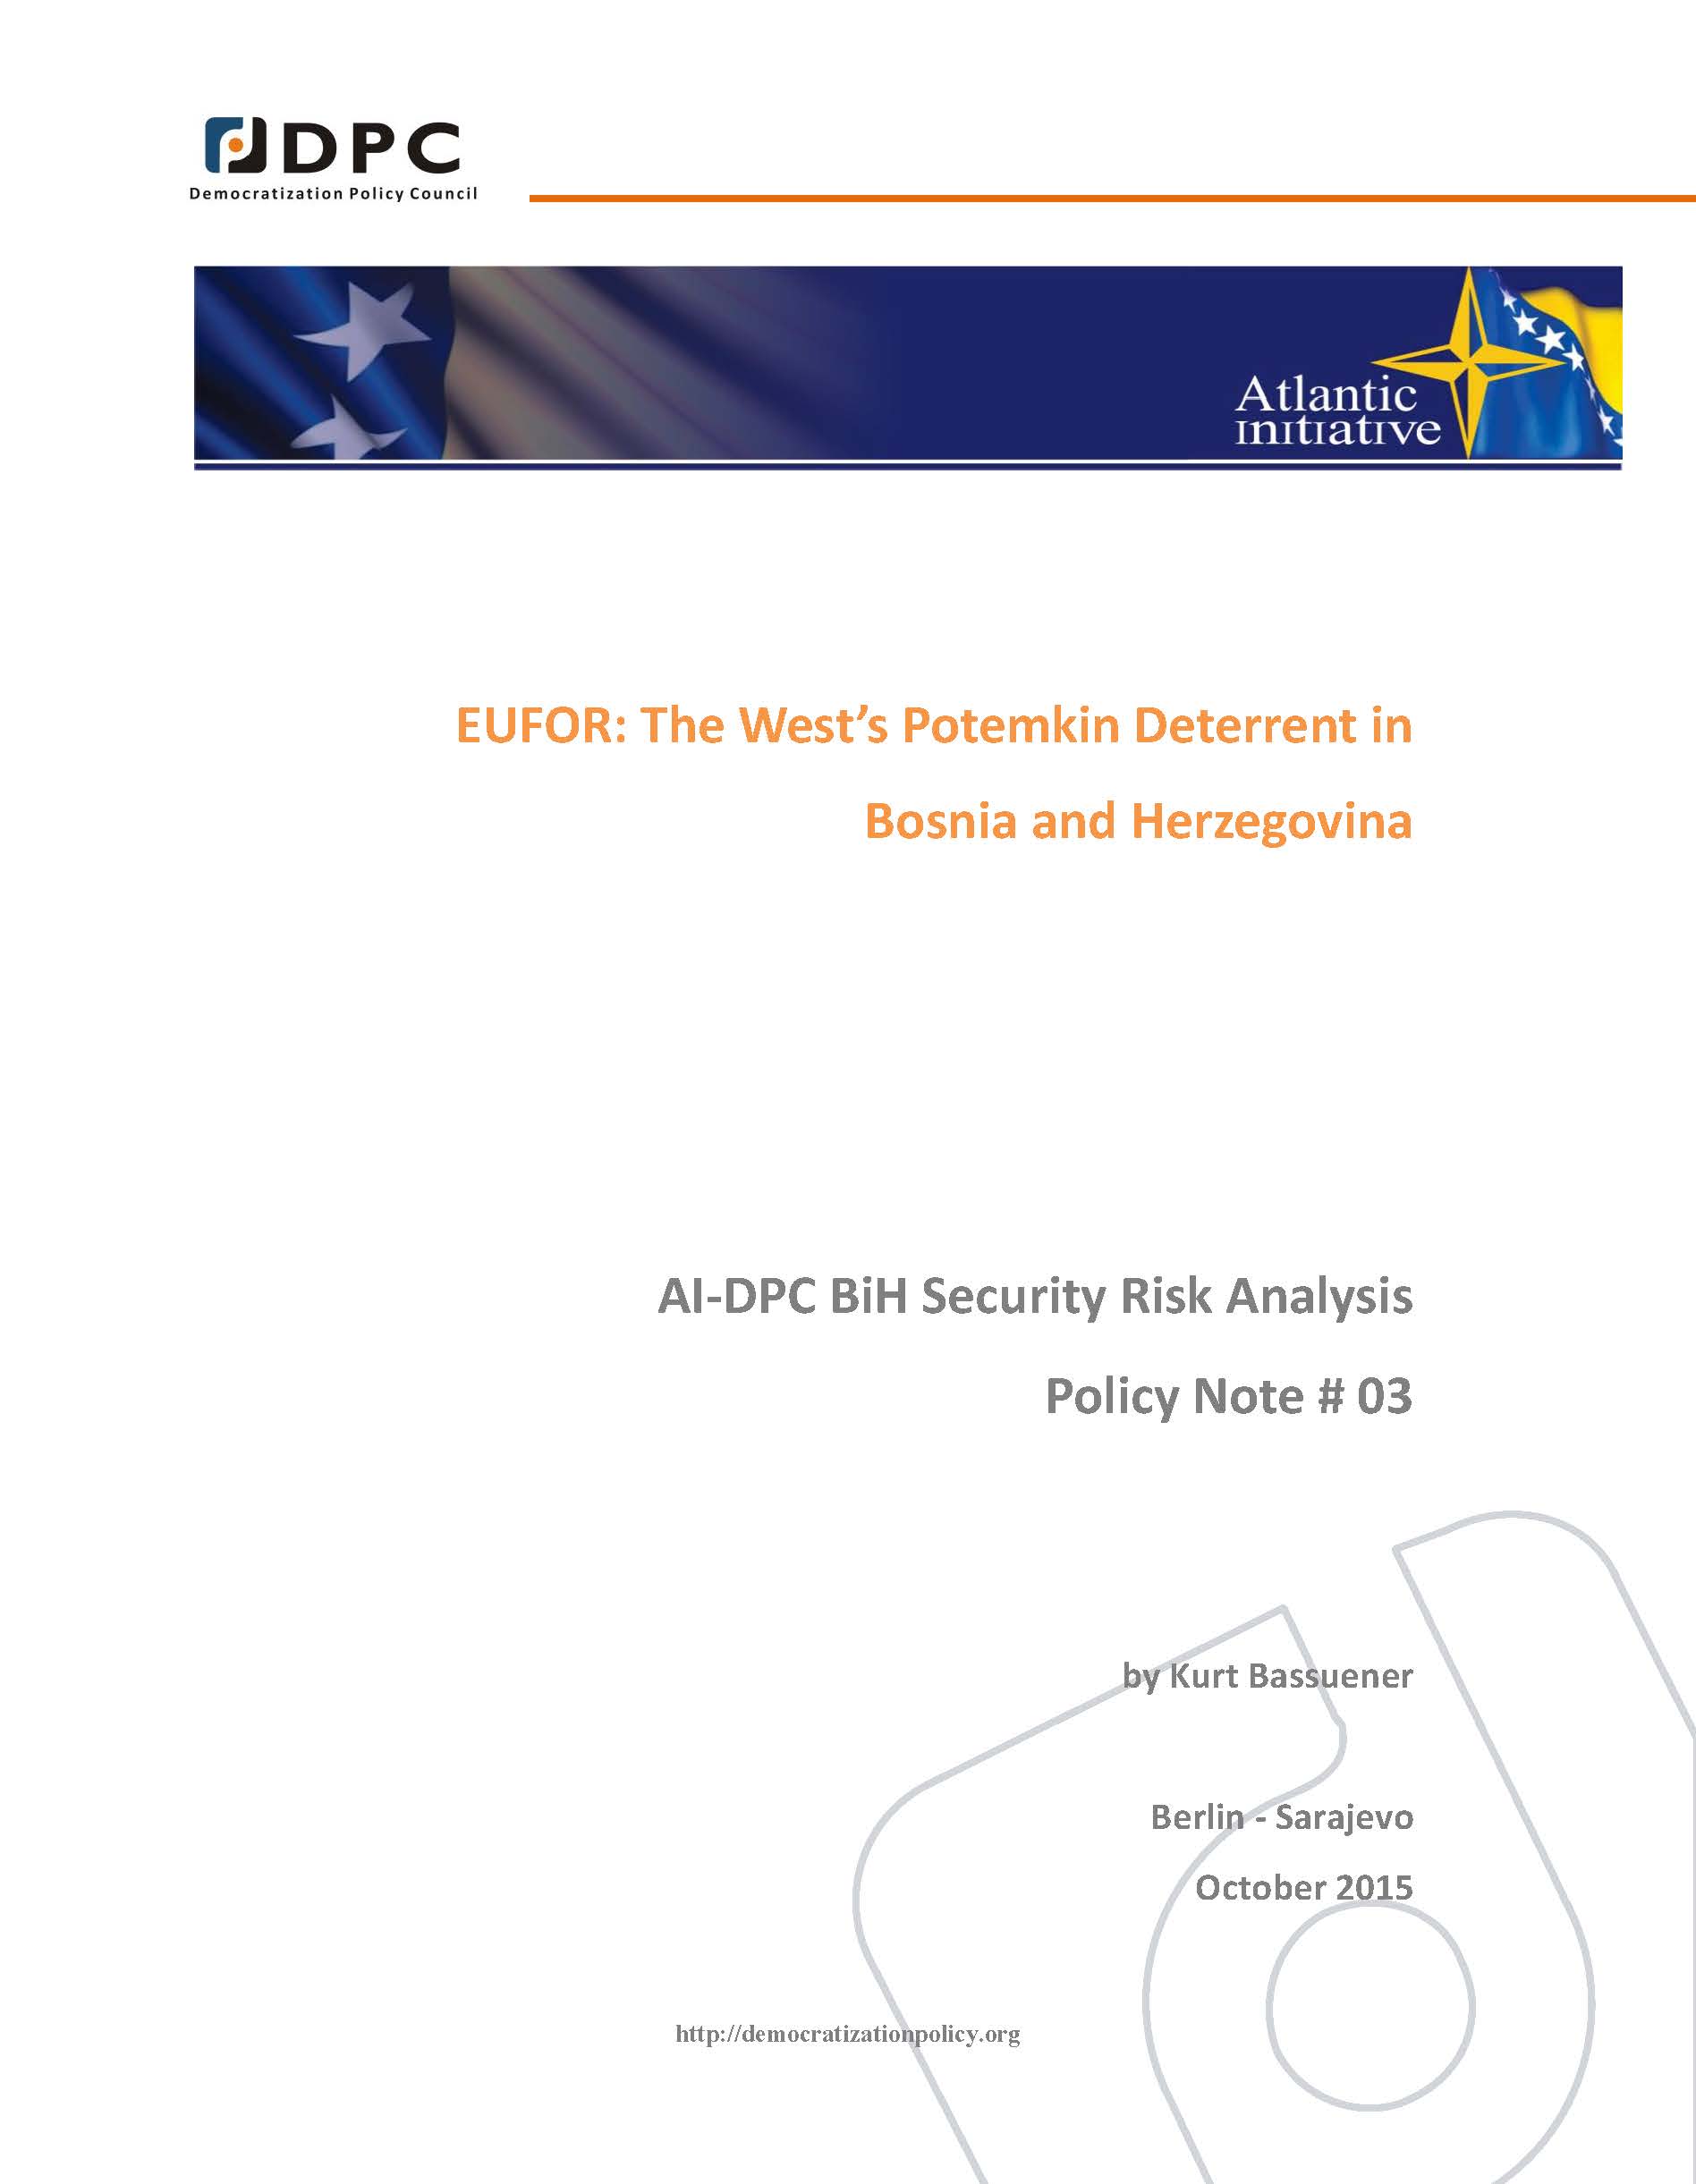 AI-DPC BiH SECURITY ANALYSIS POLICY NOTE 03: EUFOR: The West’s Potemkin Deterrent in Bosnia and Herzegovina Cover Image